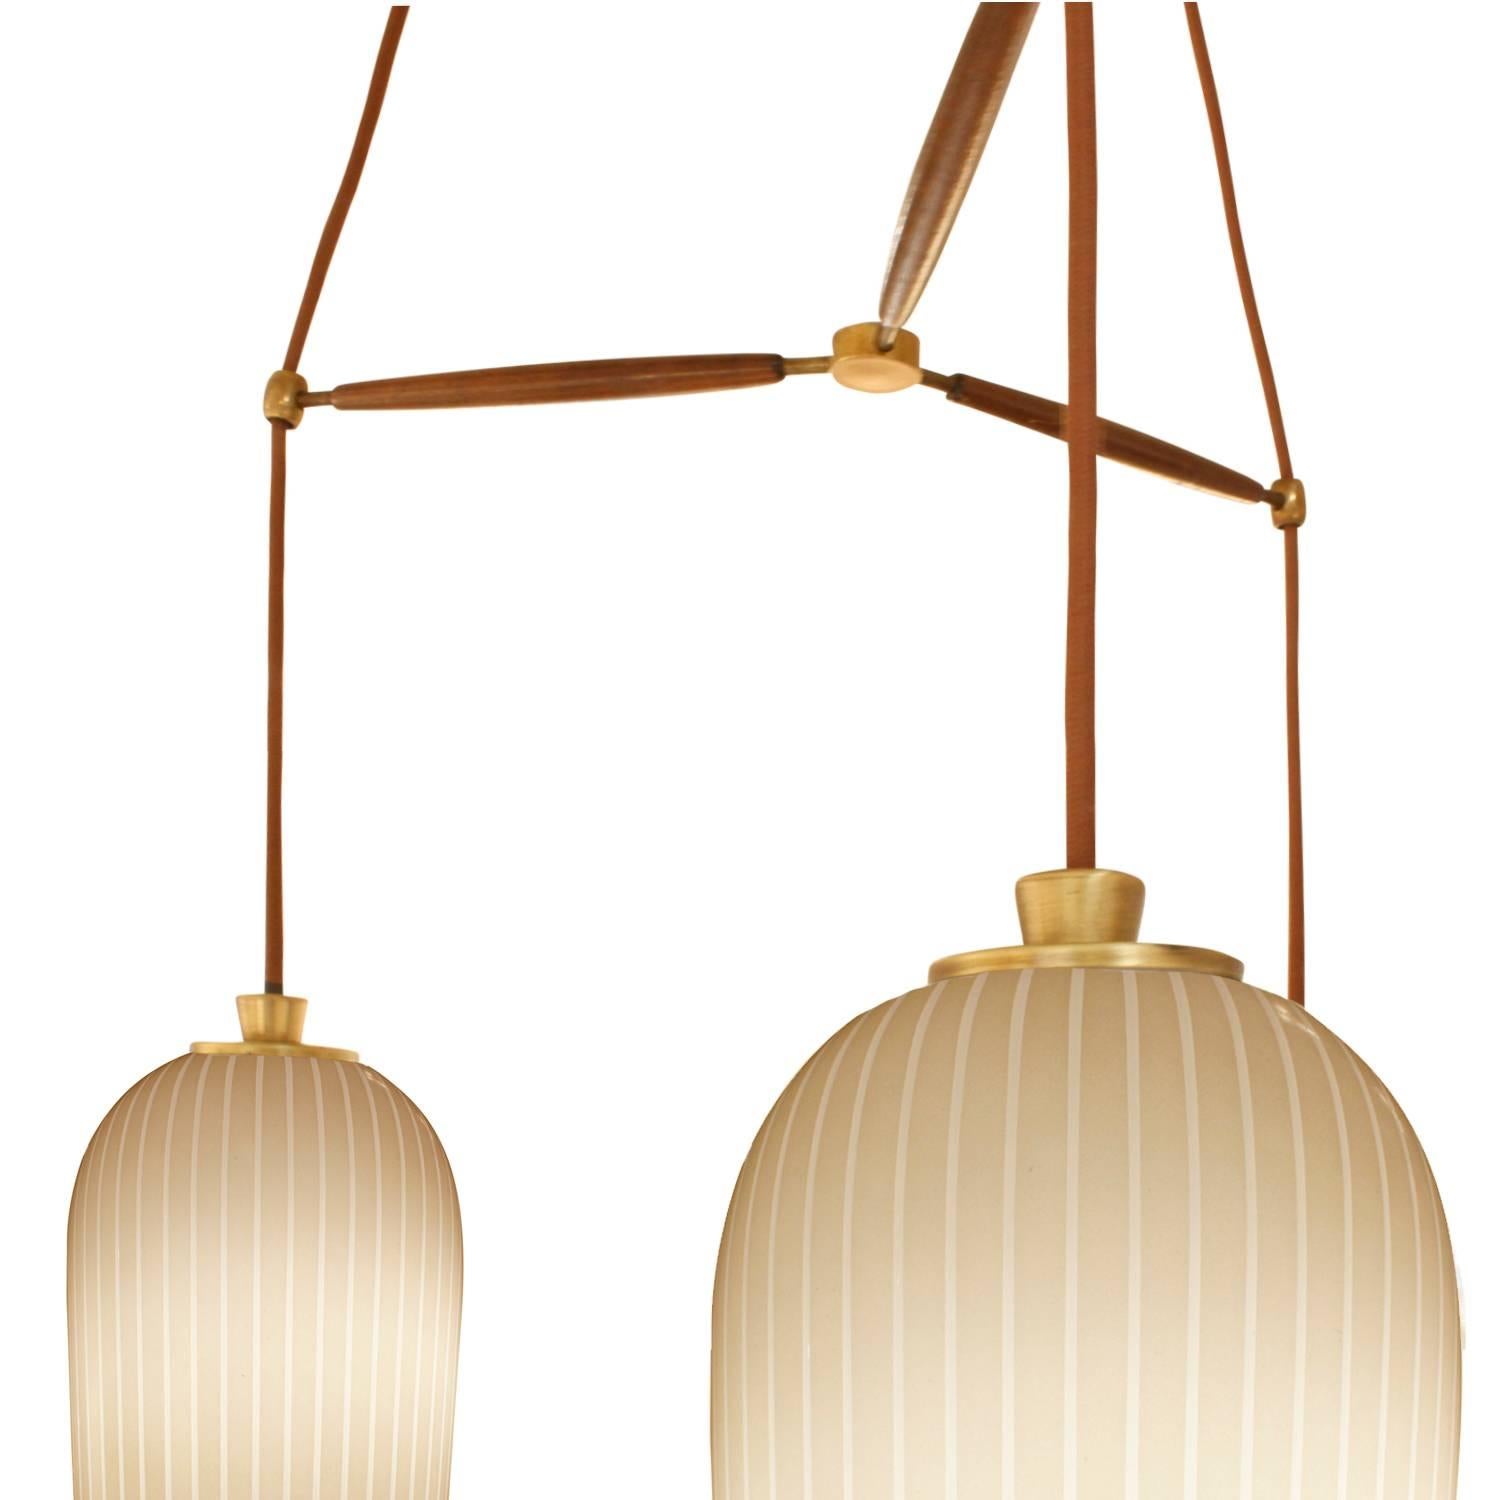 Hand-Crafted Lightolier Chandelier with Three Striped Milk Glass Shades, 1950s For Sale